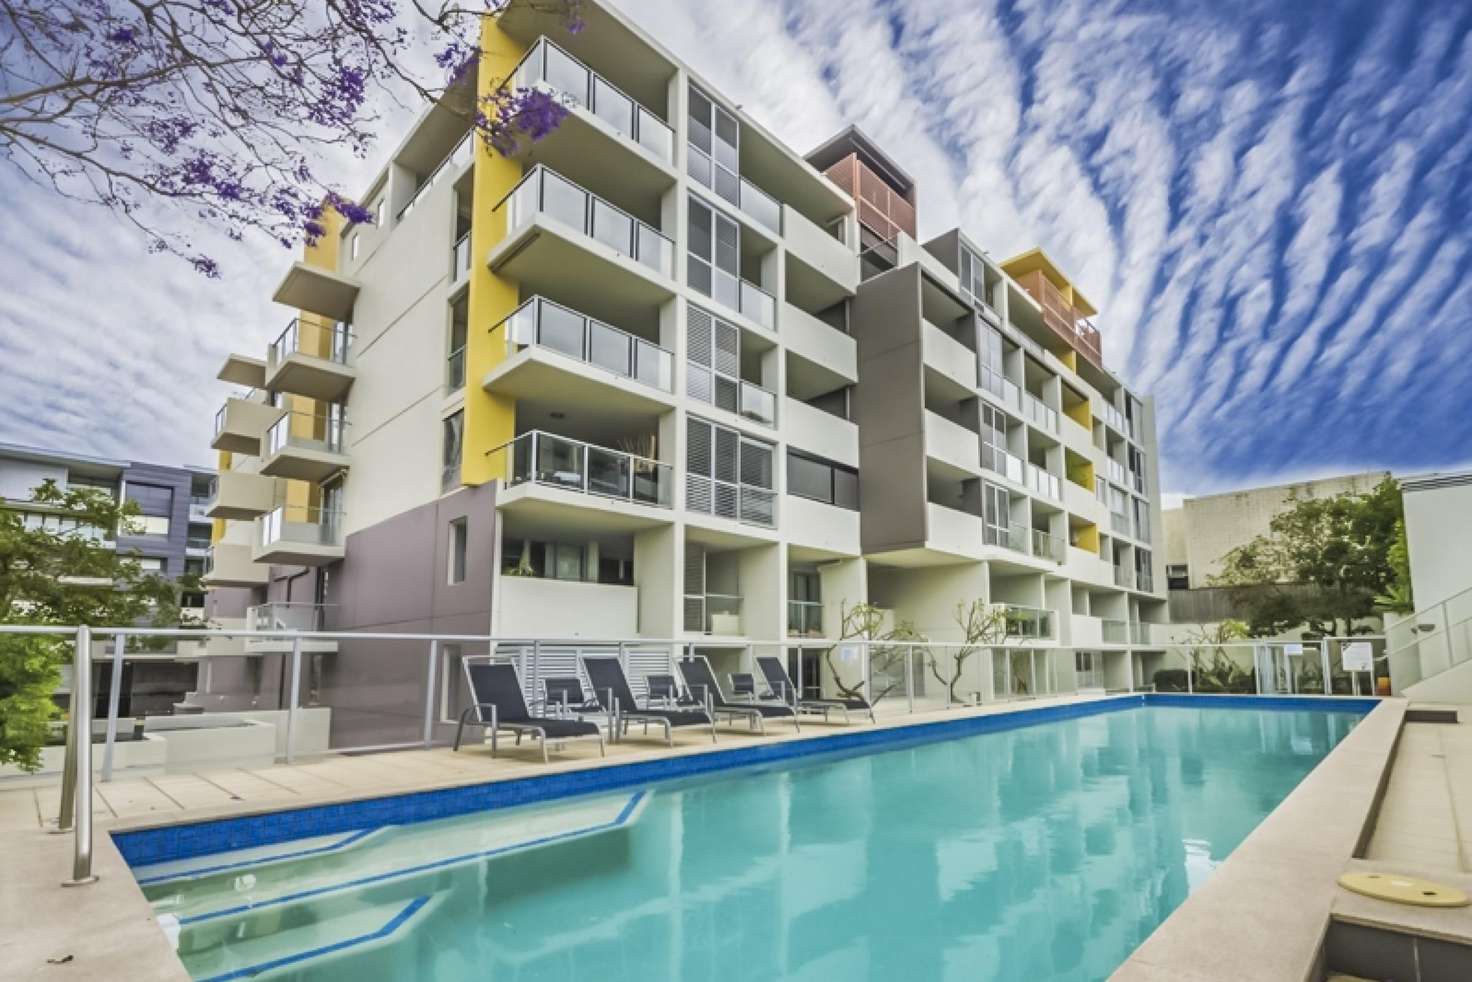 Main view of Homely apartment listing, LN:12199/6-10 Mannning Manning St, South Brisbane QLD 4101